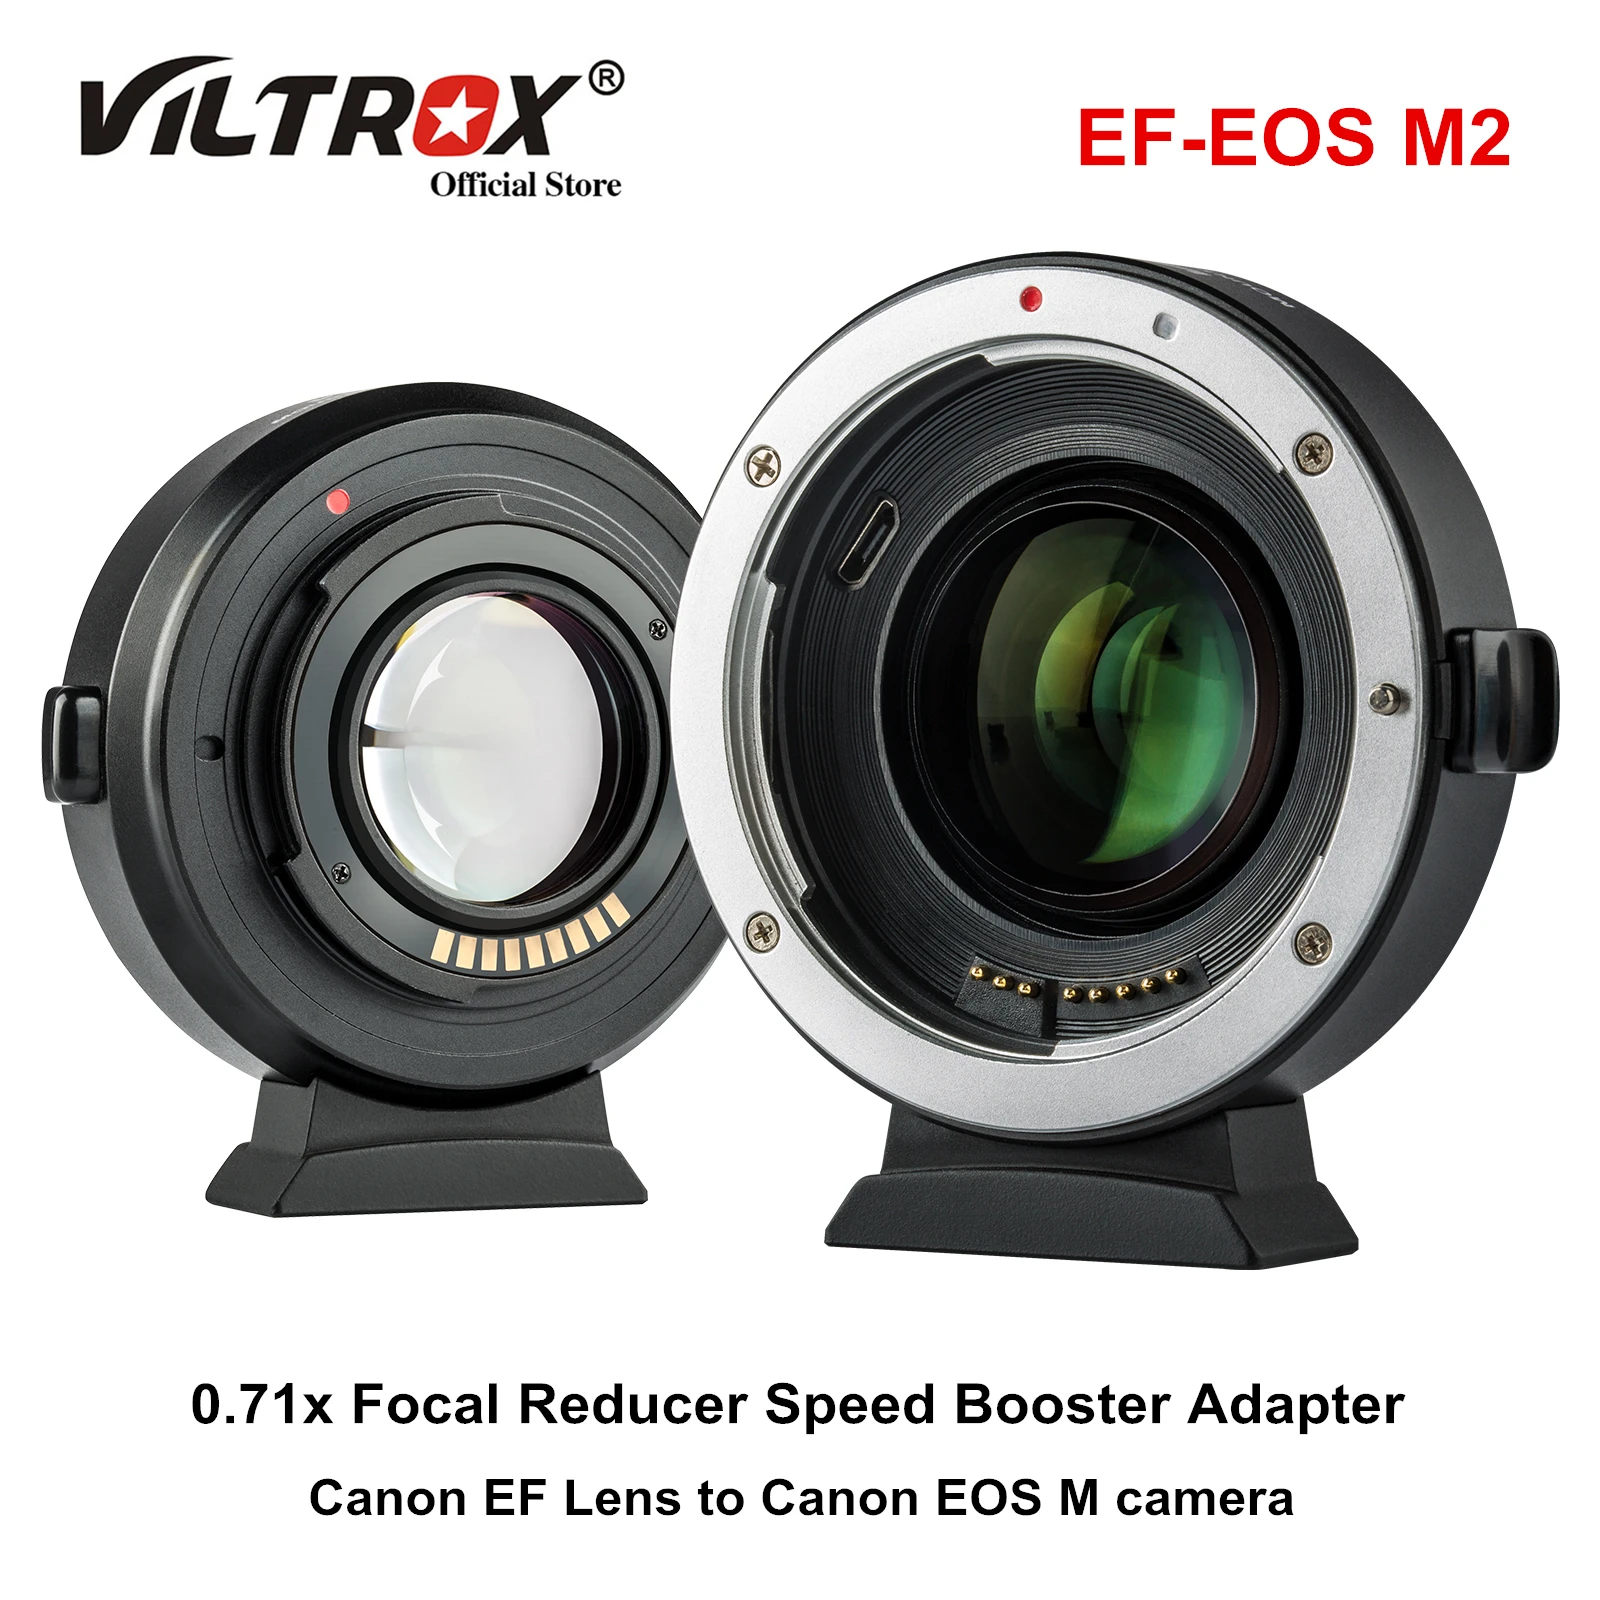 

Viltrox EF-EOS M2 EF-M Lens Adapter 0.71x Focal Reducer Speed Booster Adapter For Canon EF Lens To EOS M Camera M6 M200 M5 M50